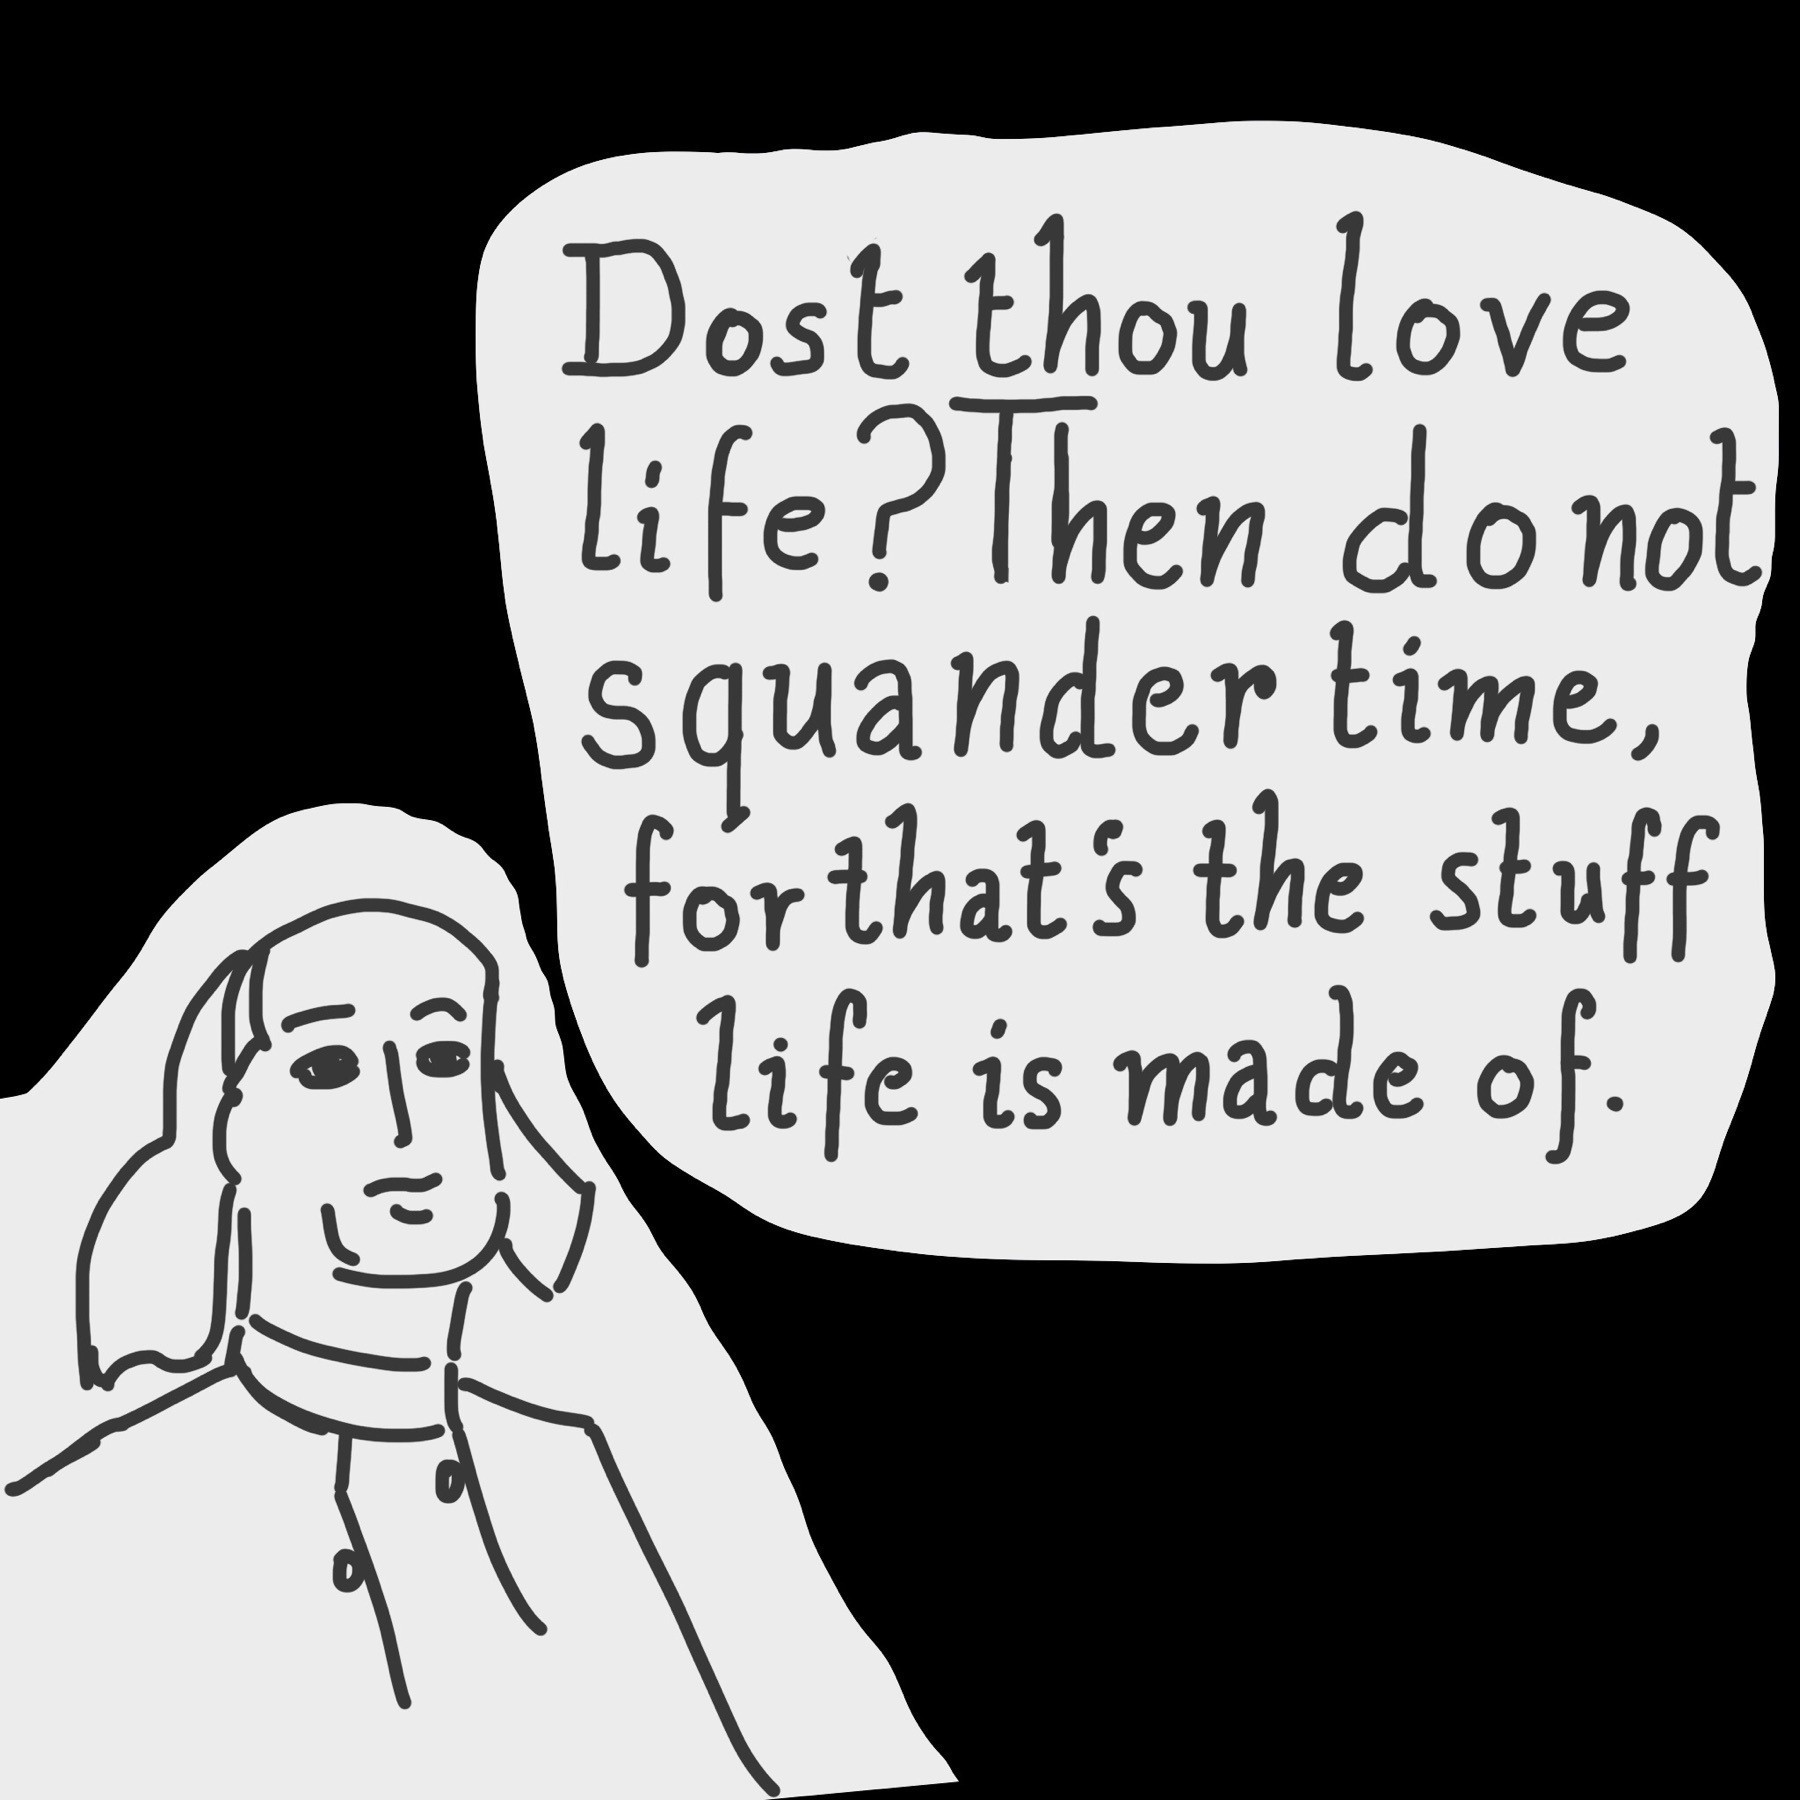 dost thou love life? The do not squander time, for that's the stuff life is made of.